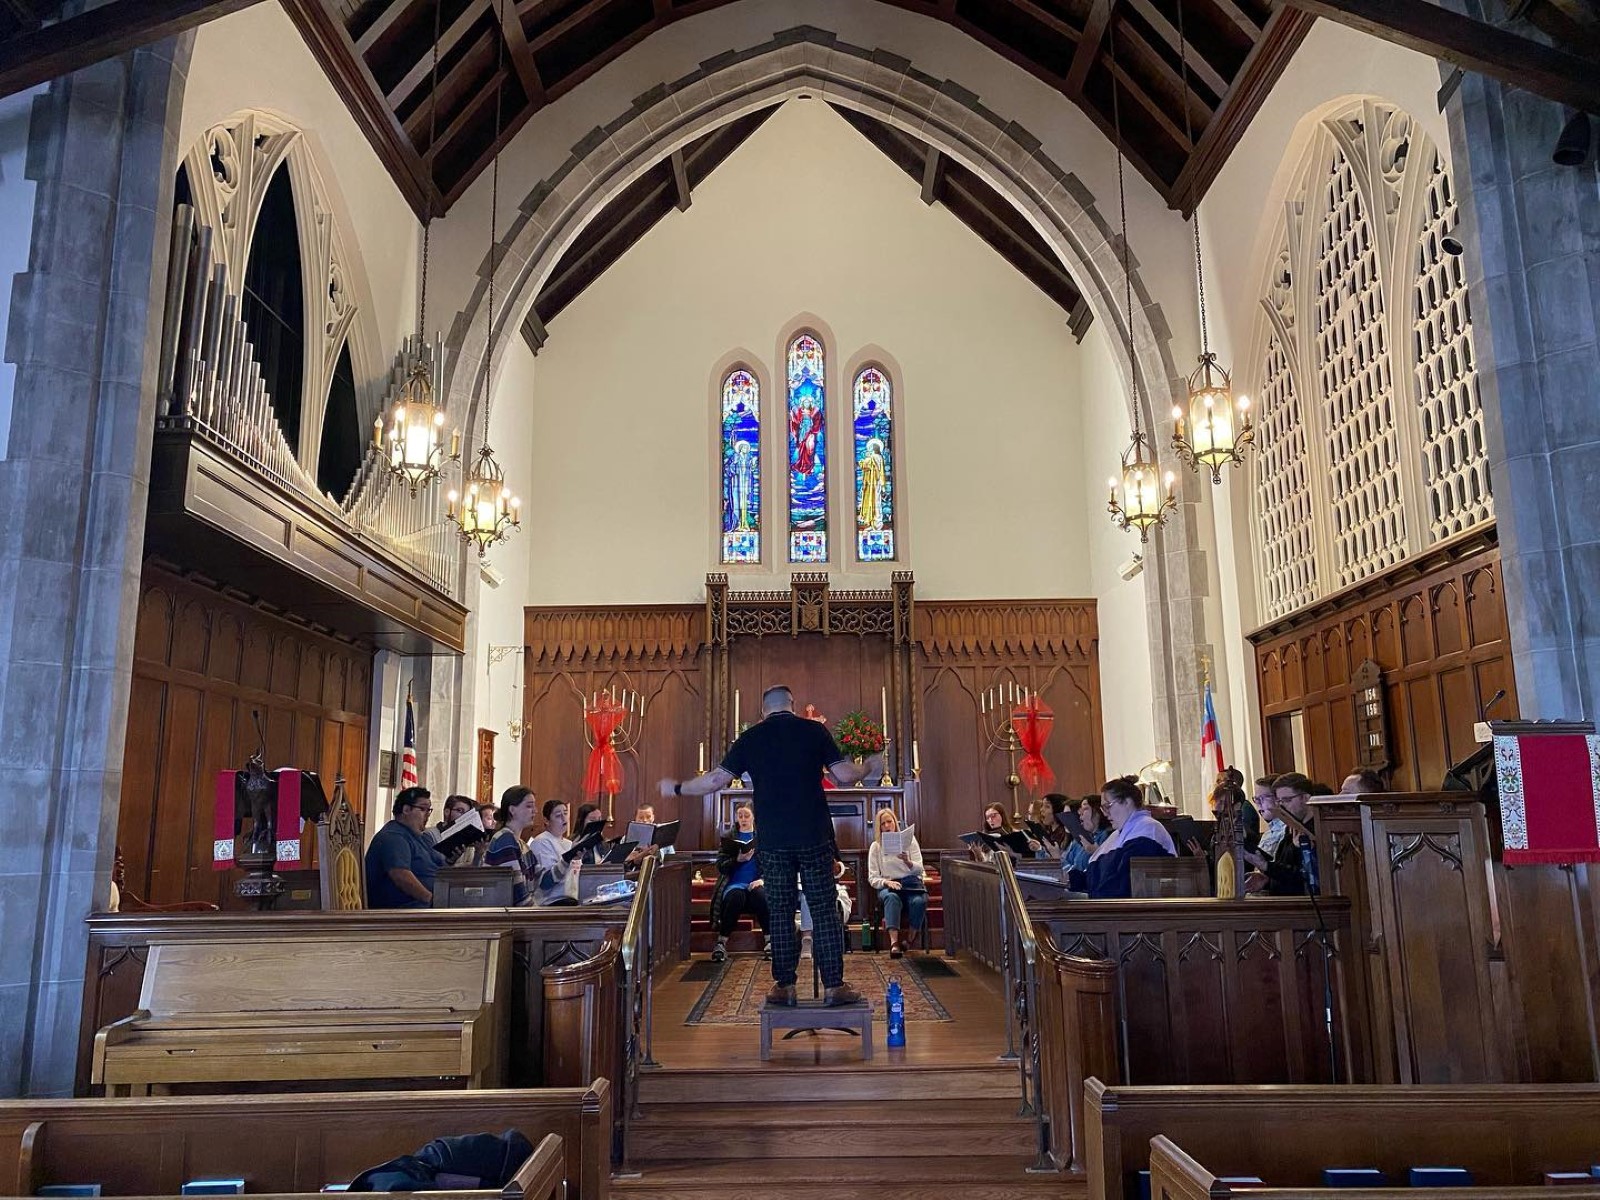 Queen City Chorale rehearses inside Christ Episcopal Church in Springfield, Missouri